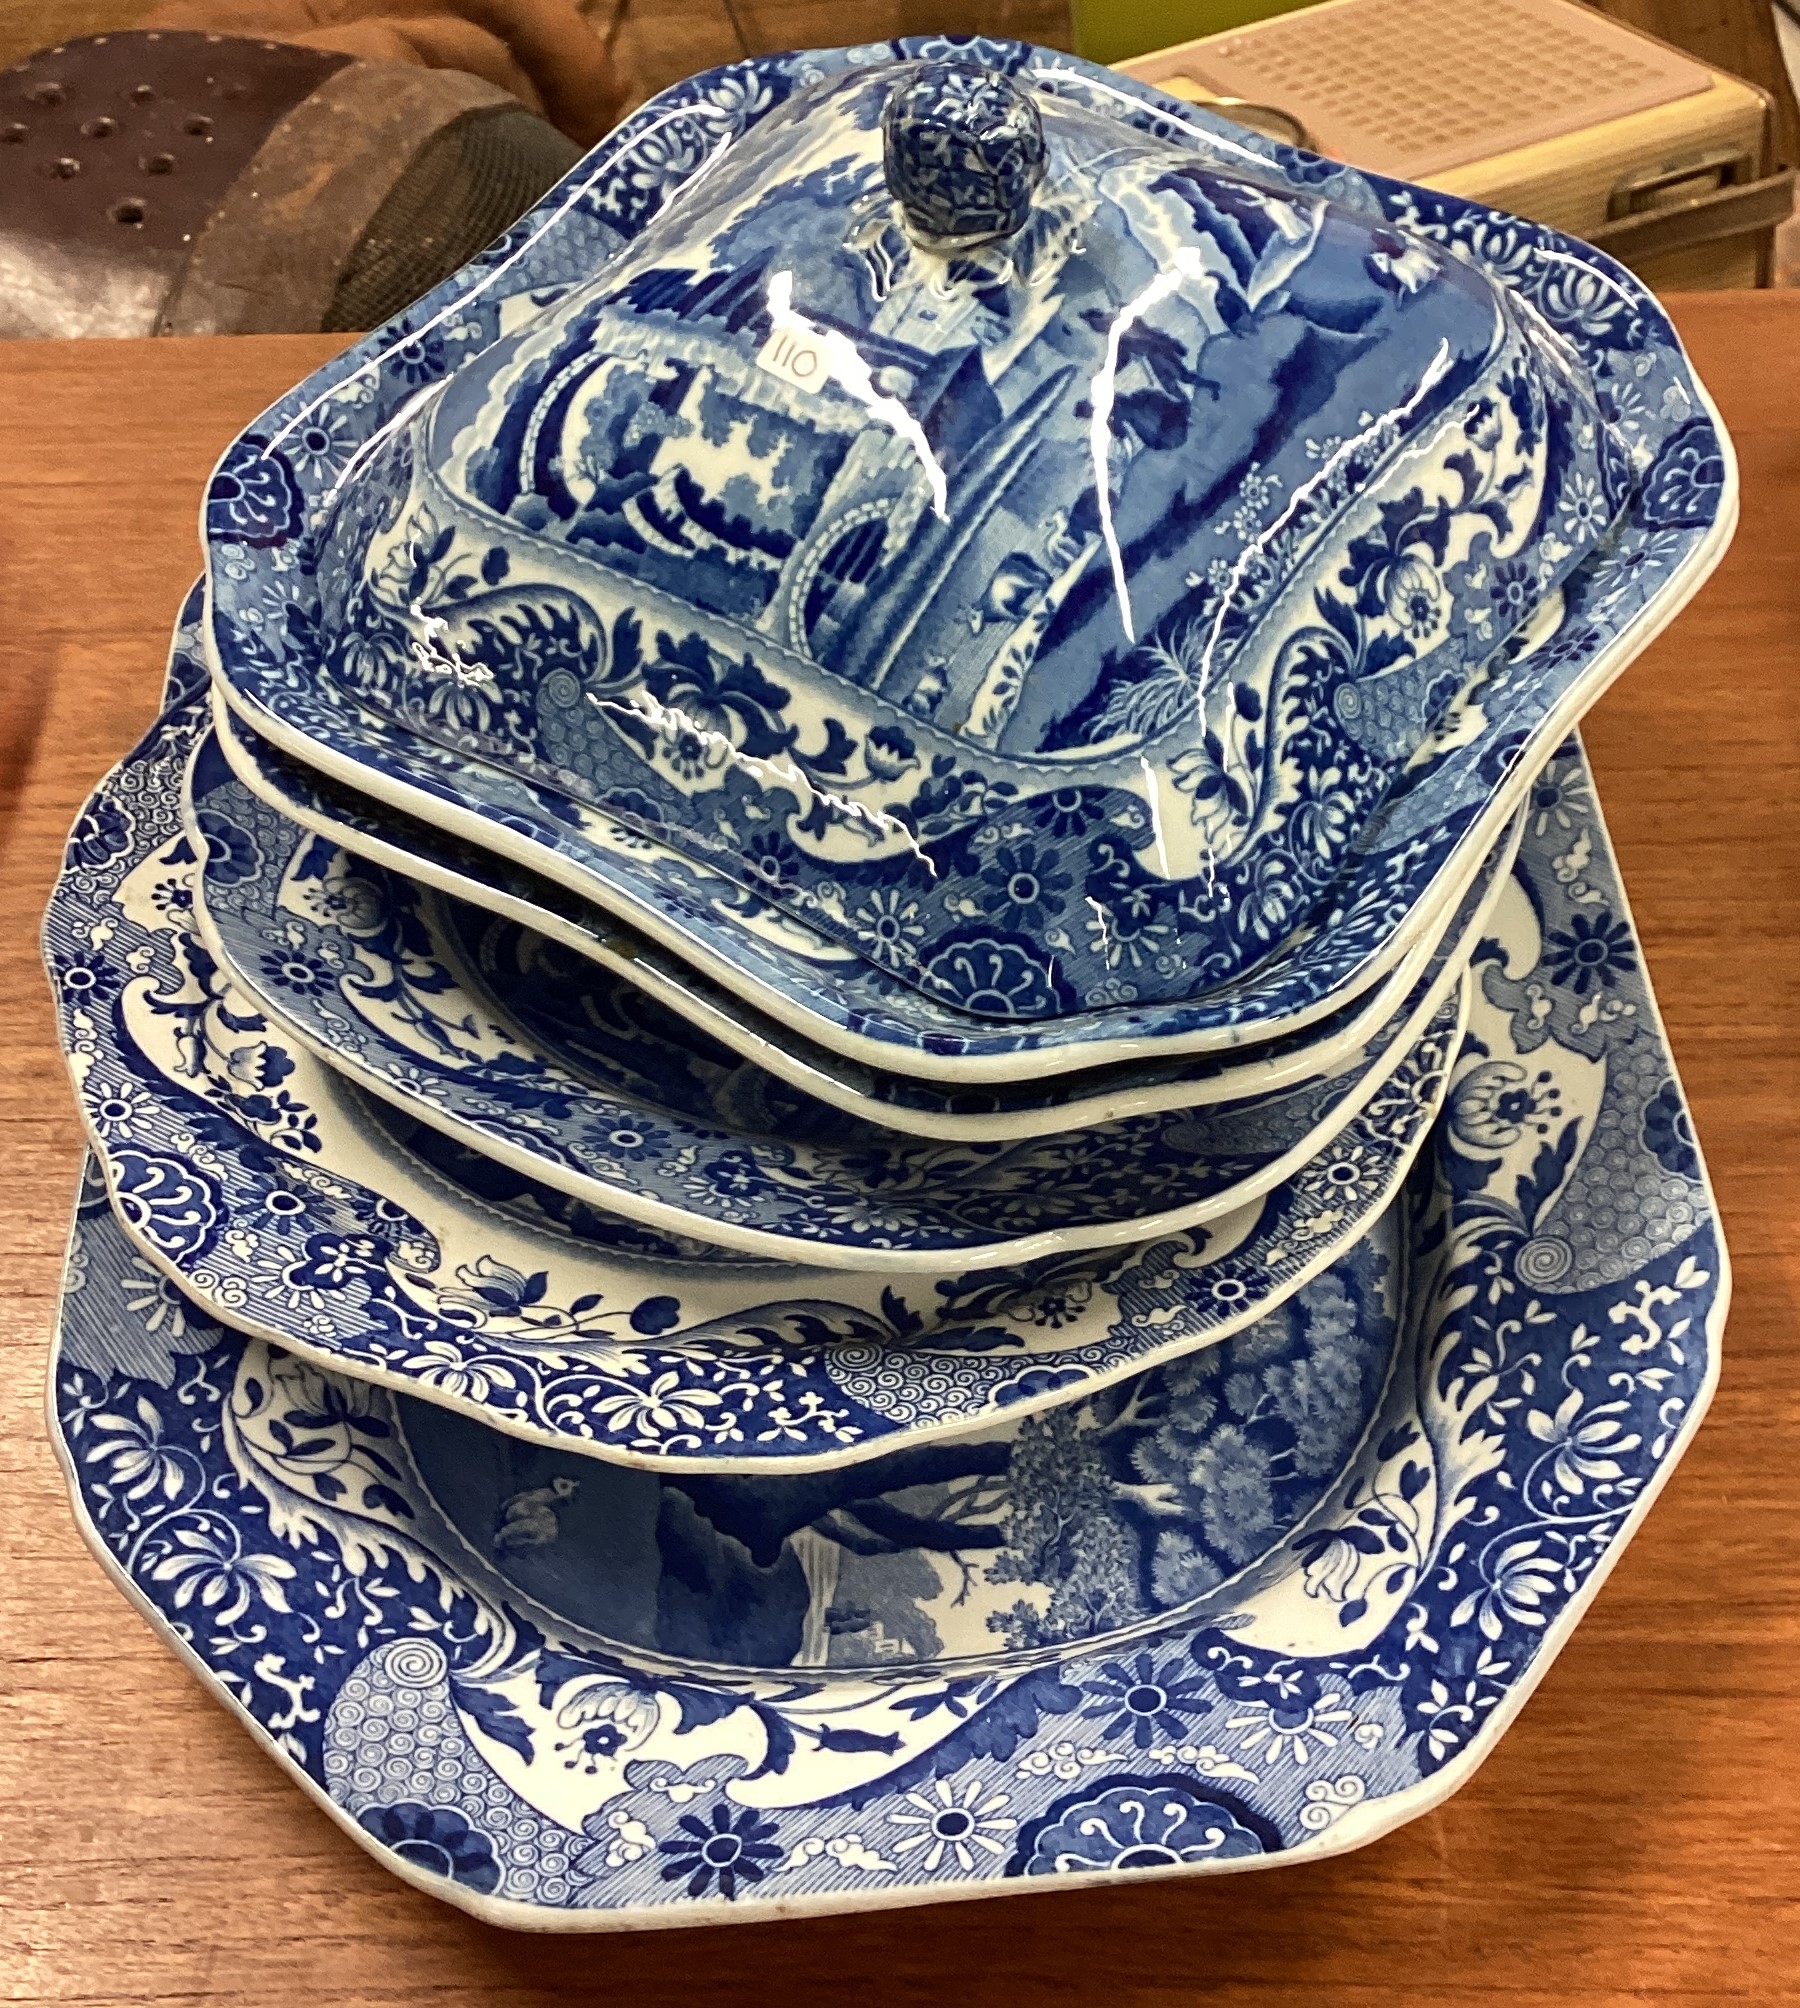 A collection of blue and white meat plates.